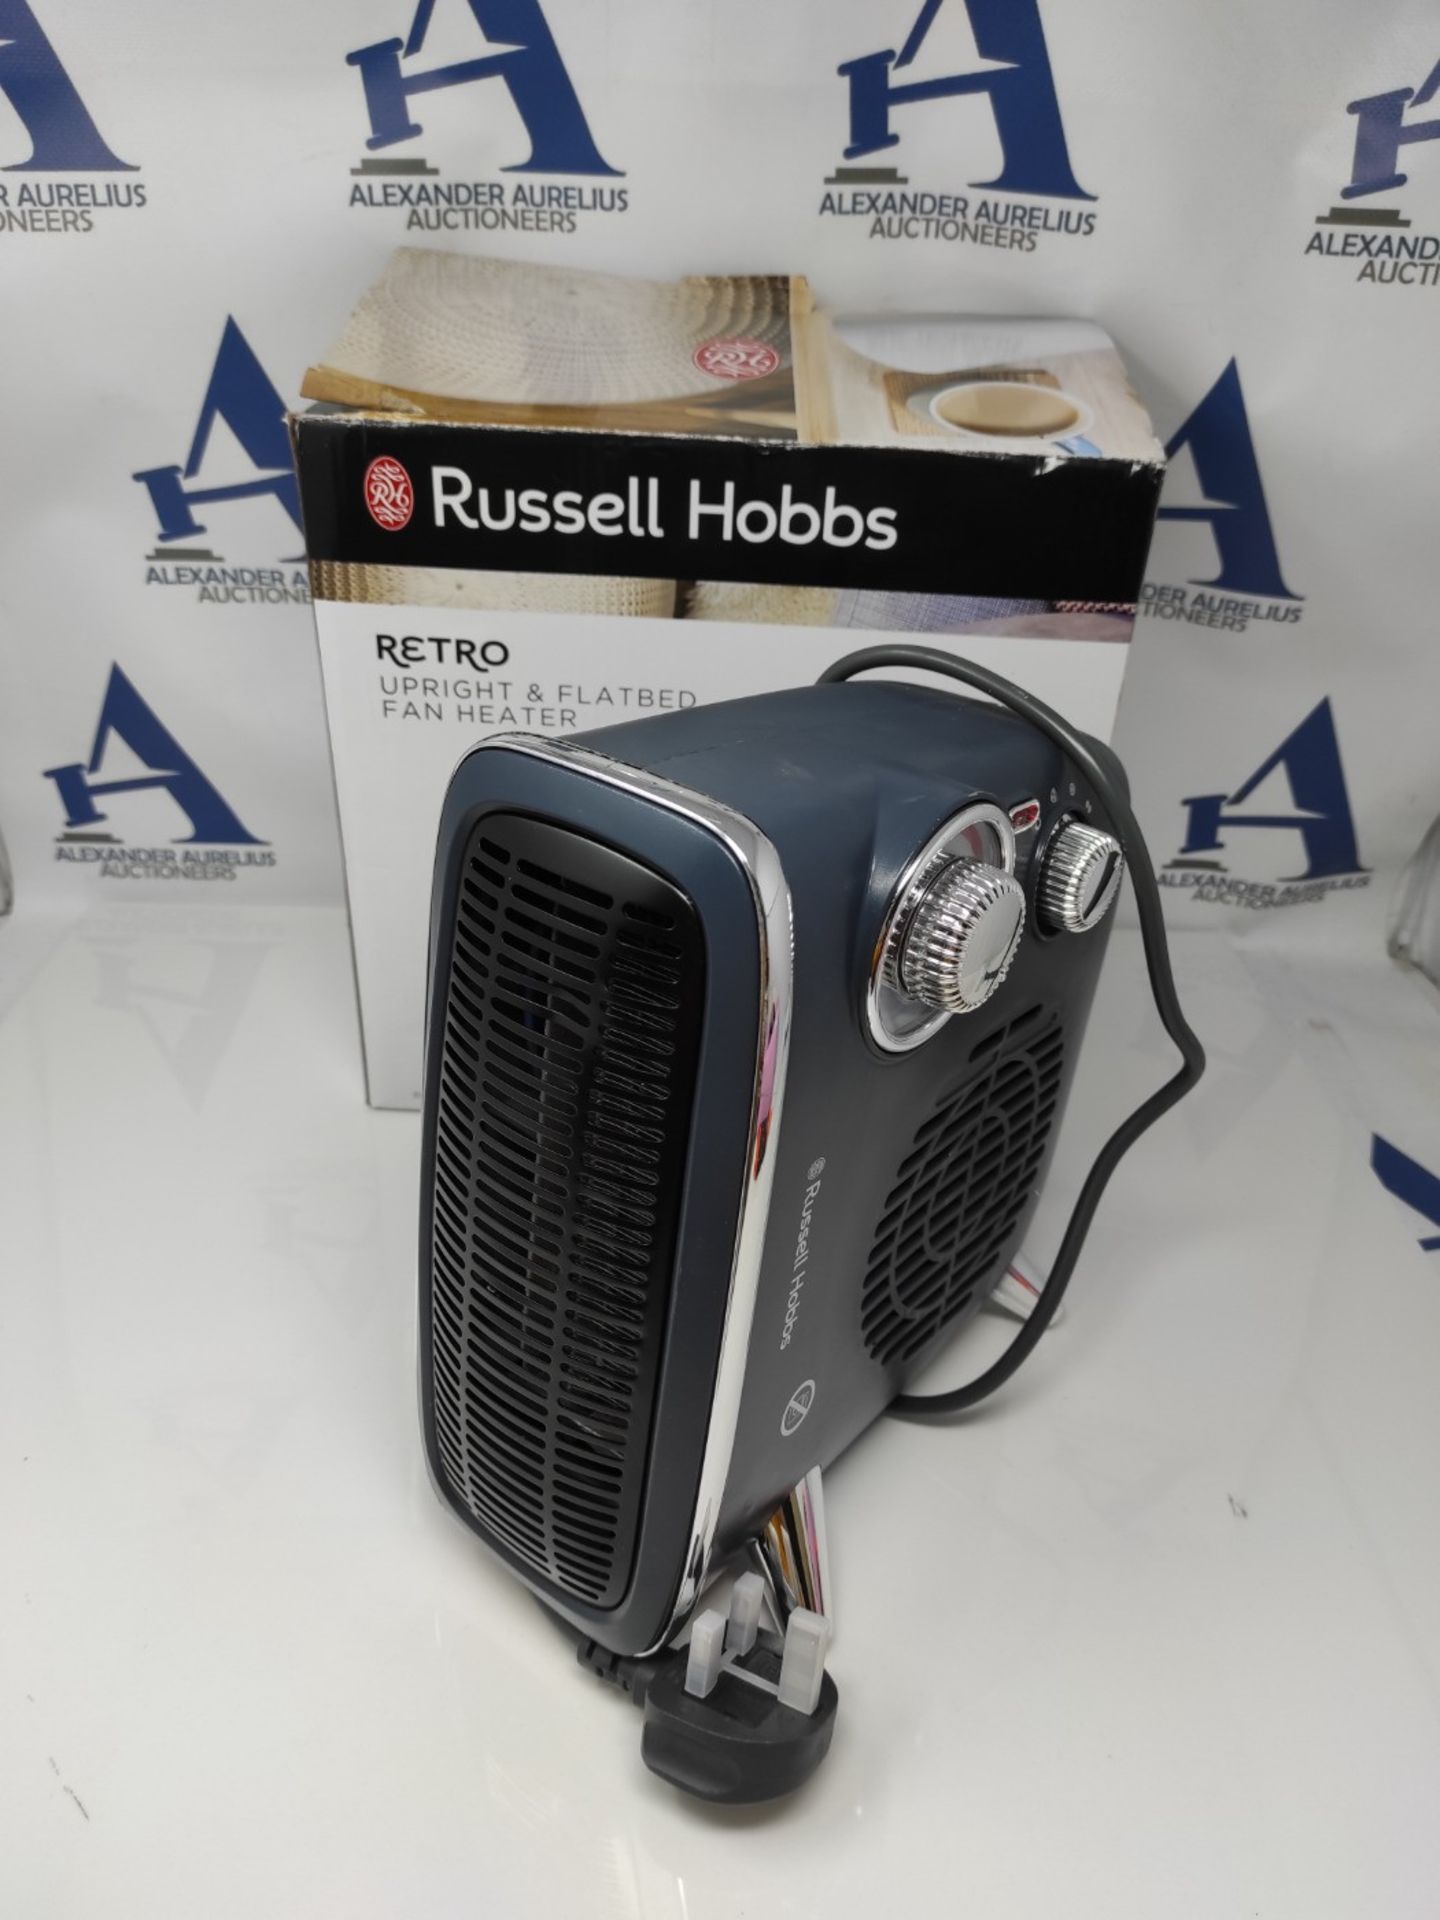 Russell Hobbs 1800W/1.8KW Electric Heater, Retro Horizontal/Vertical Fan Heater in Gre - Image 2 of 2